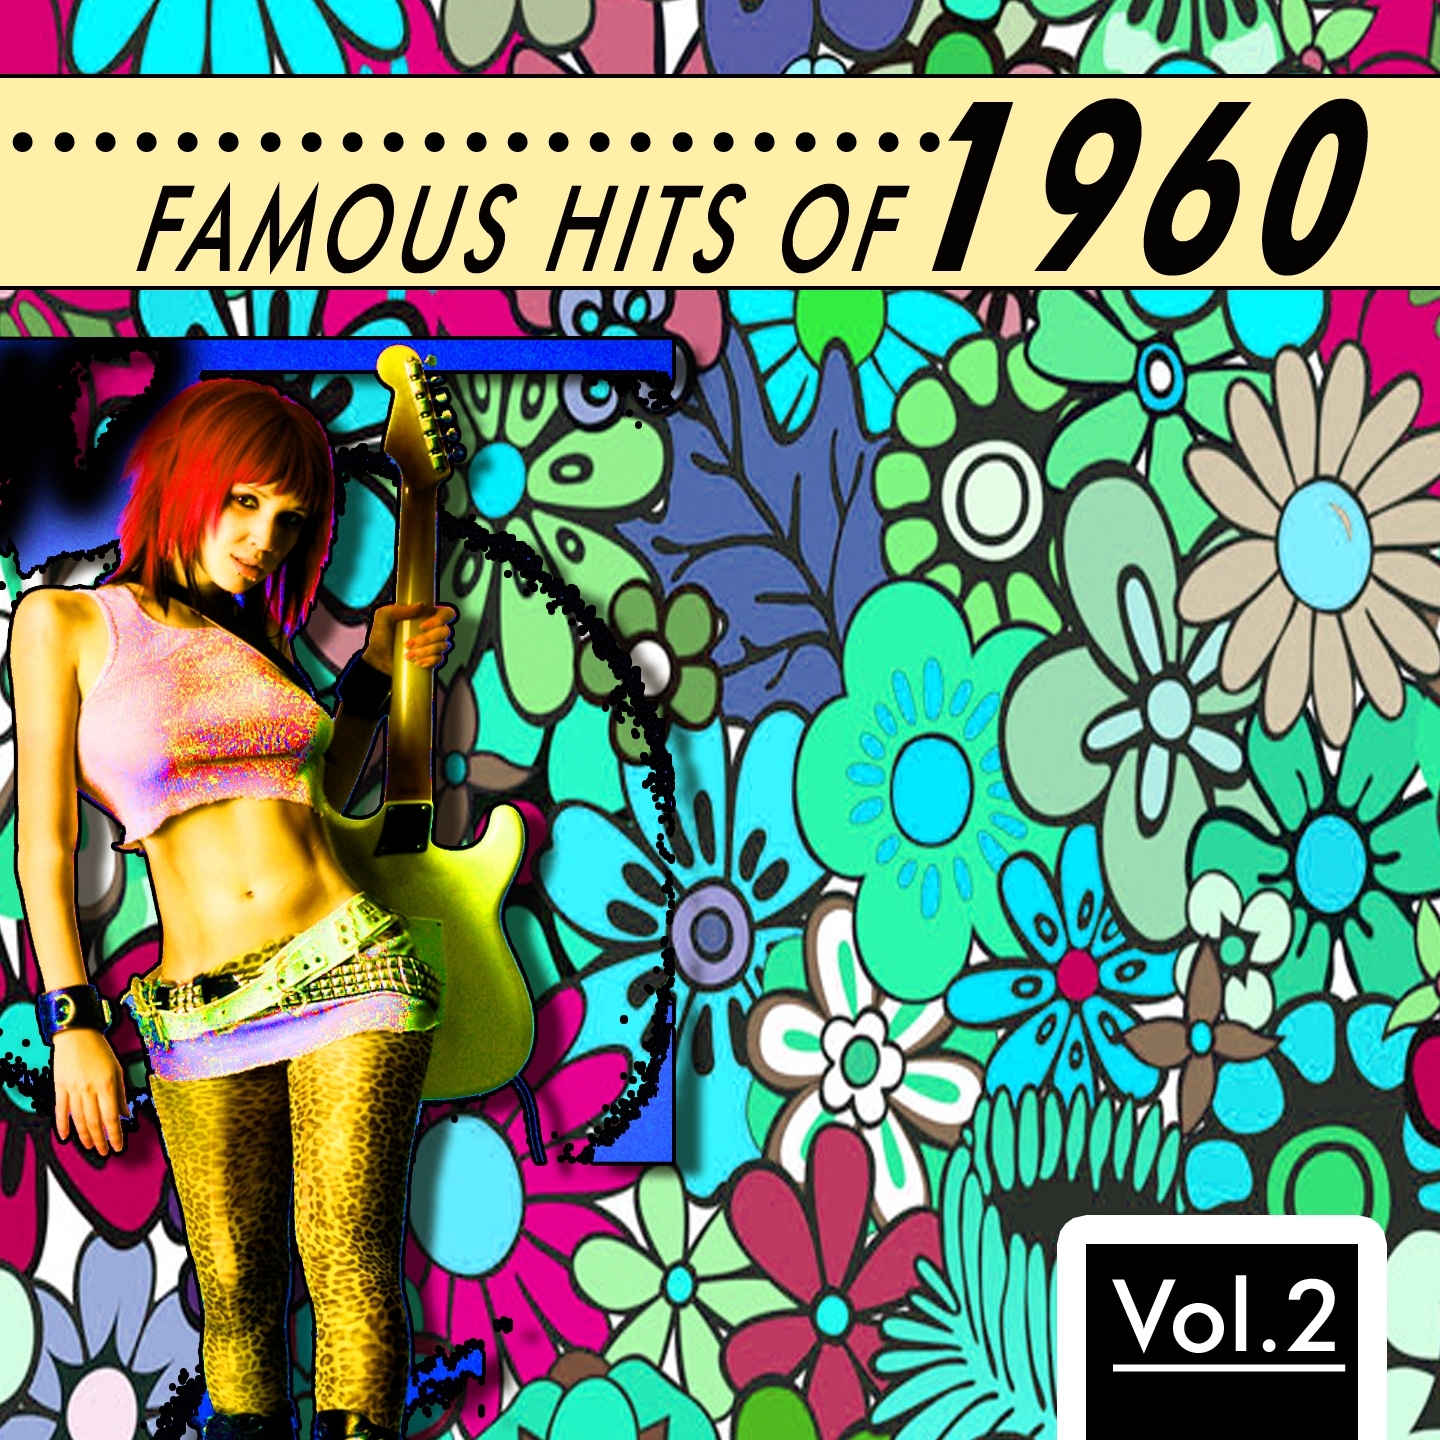 Famous Hits from 1960, Vol. 2